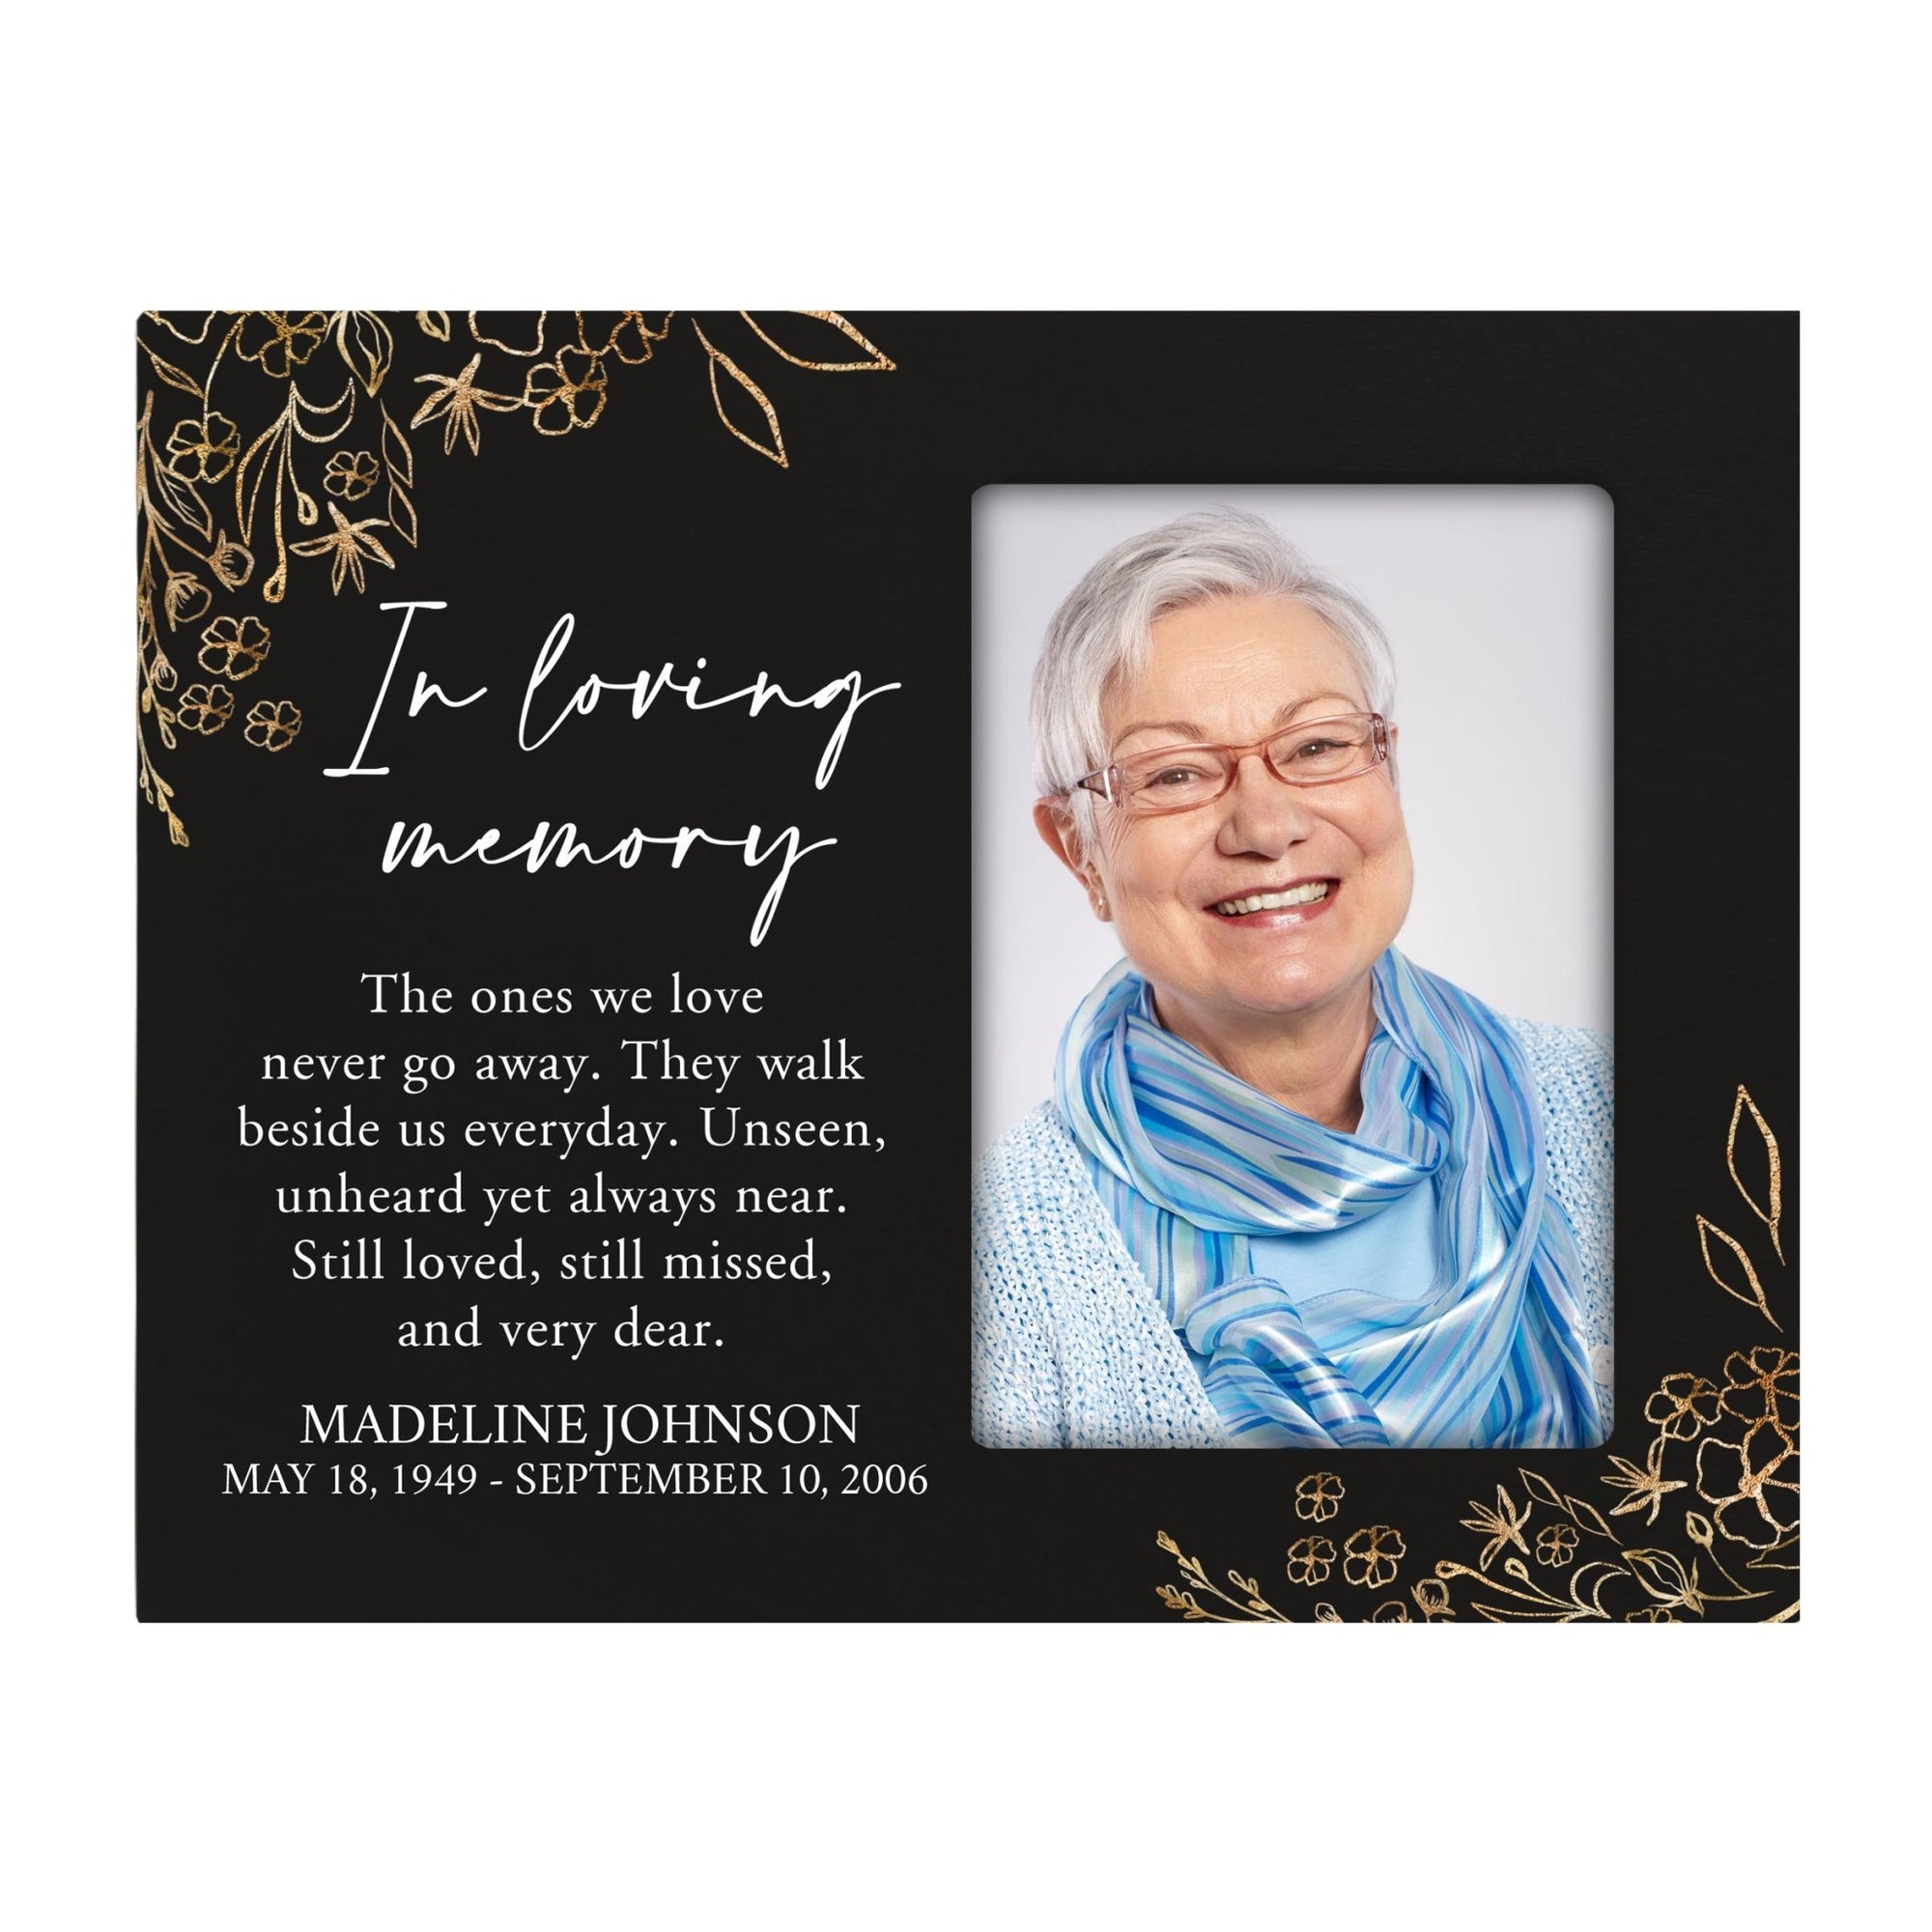 Personalized Horizontal 8x10 Wooden Memorial Picture Frame Holds 4x6 Photo - In Loving Memory (Love) - LifeSong Milestones